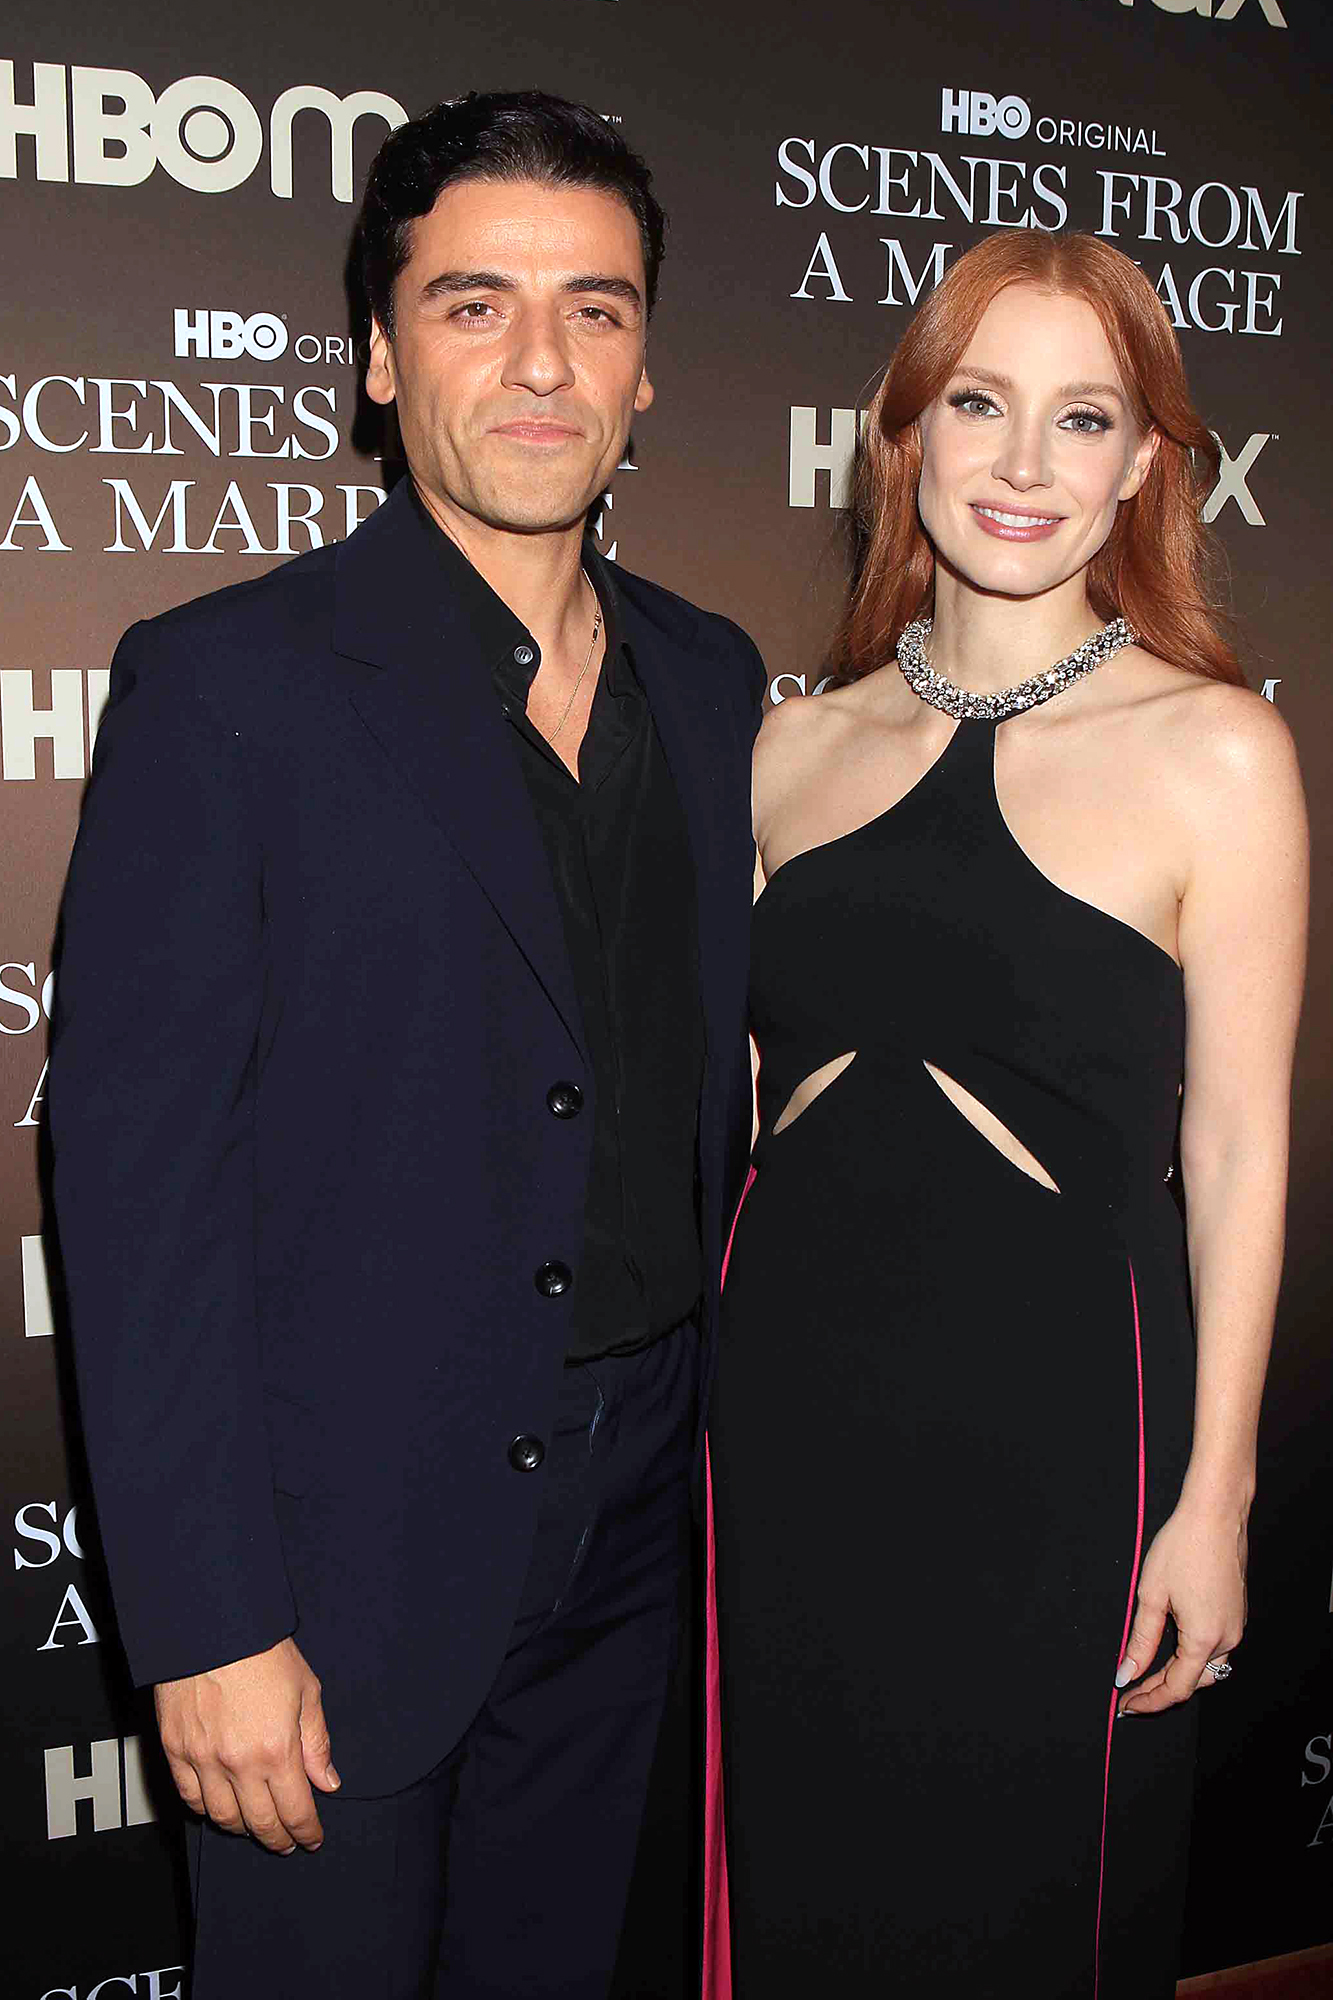 Jessica Chastain Had 1 Rule for Doing Nude Scenes With Oscar Isaac